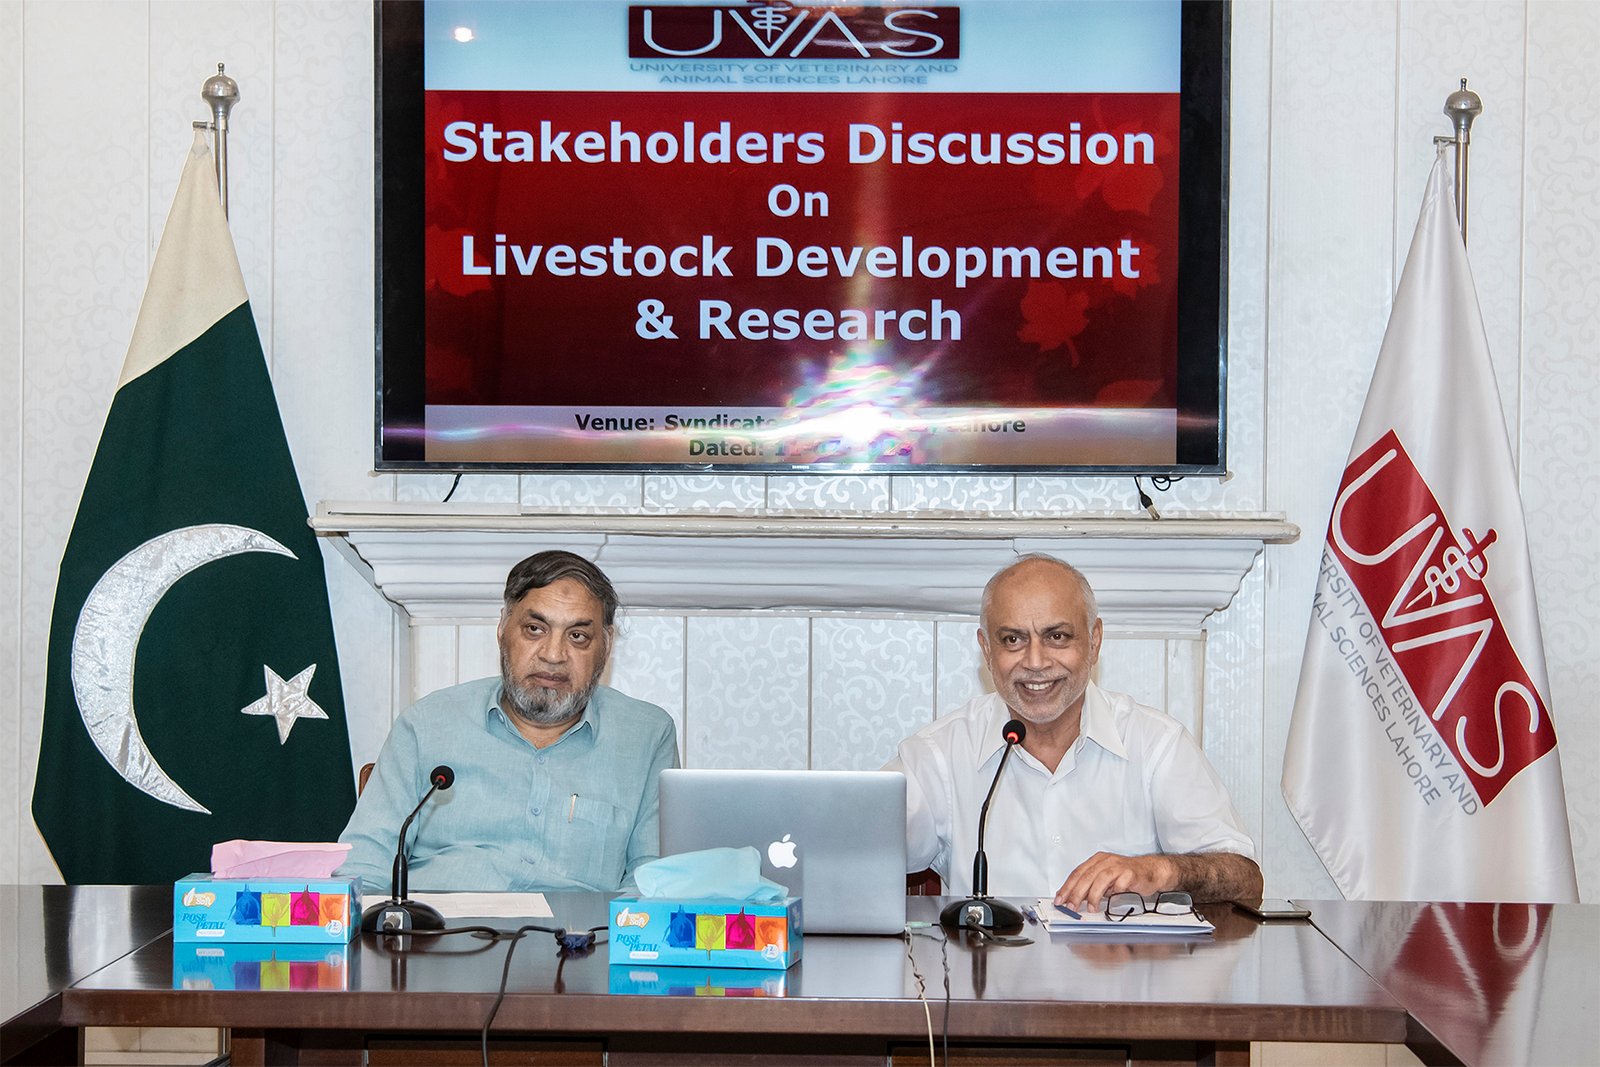 UVAS Arranges Stakeholder Discussion On Livestock Research